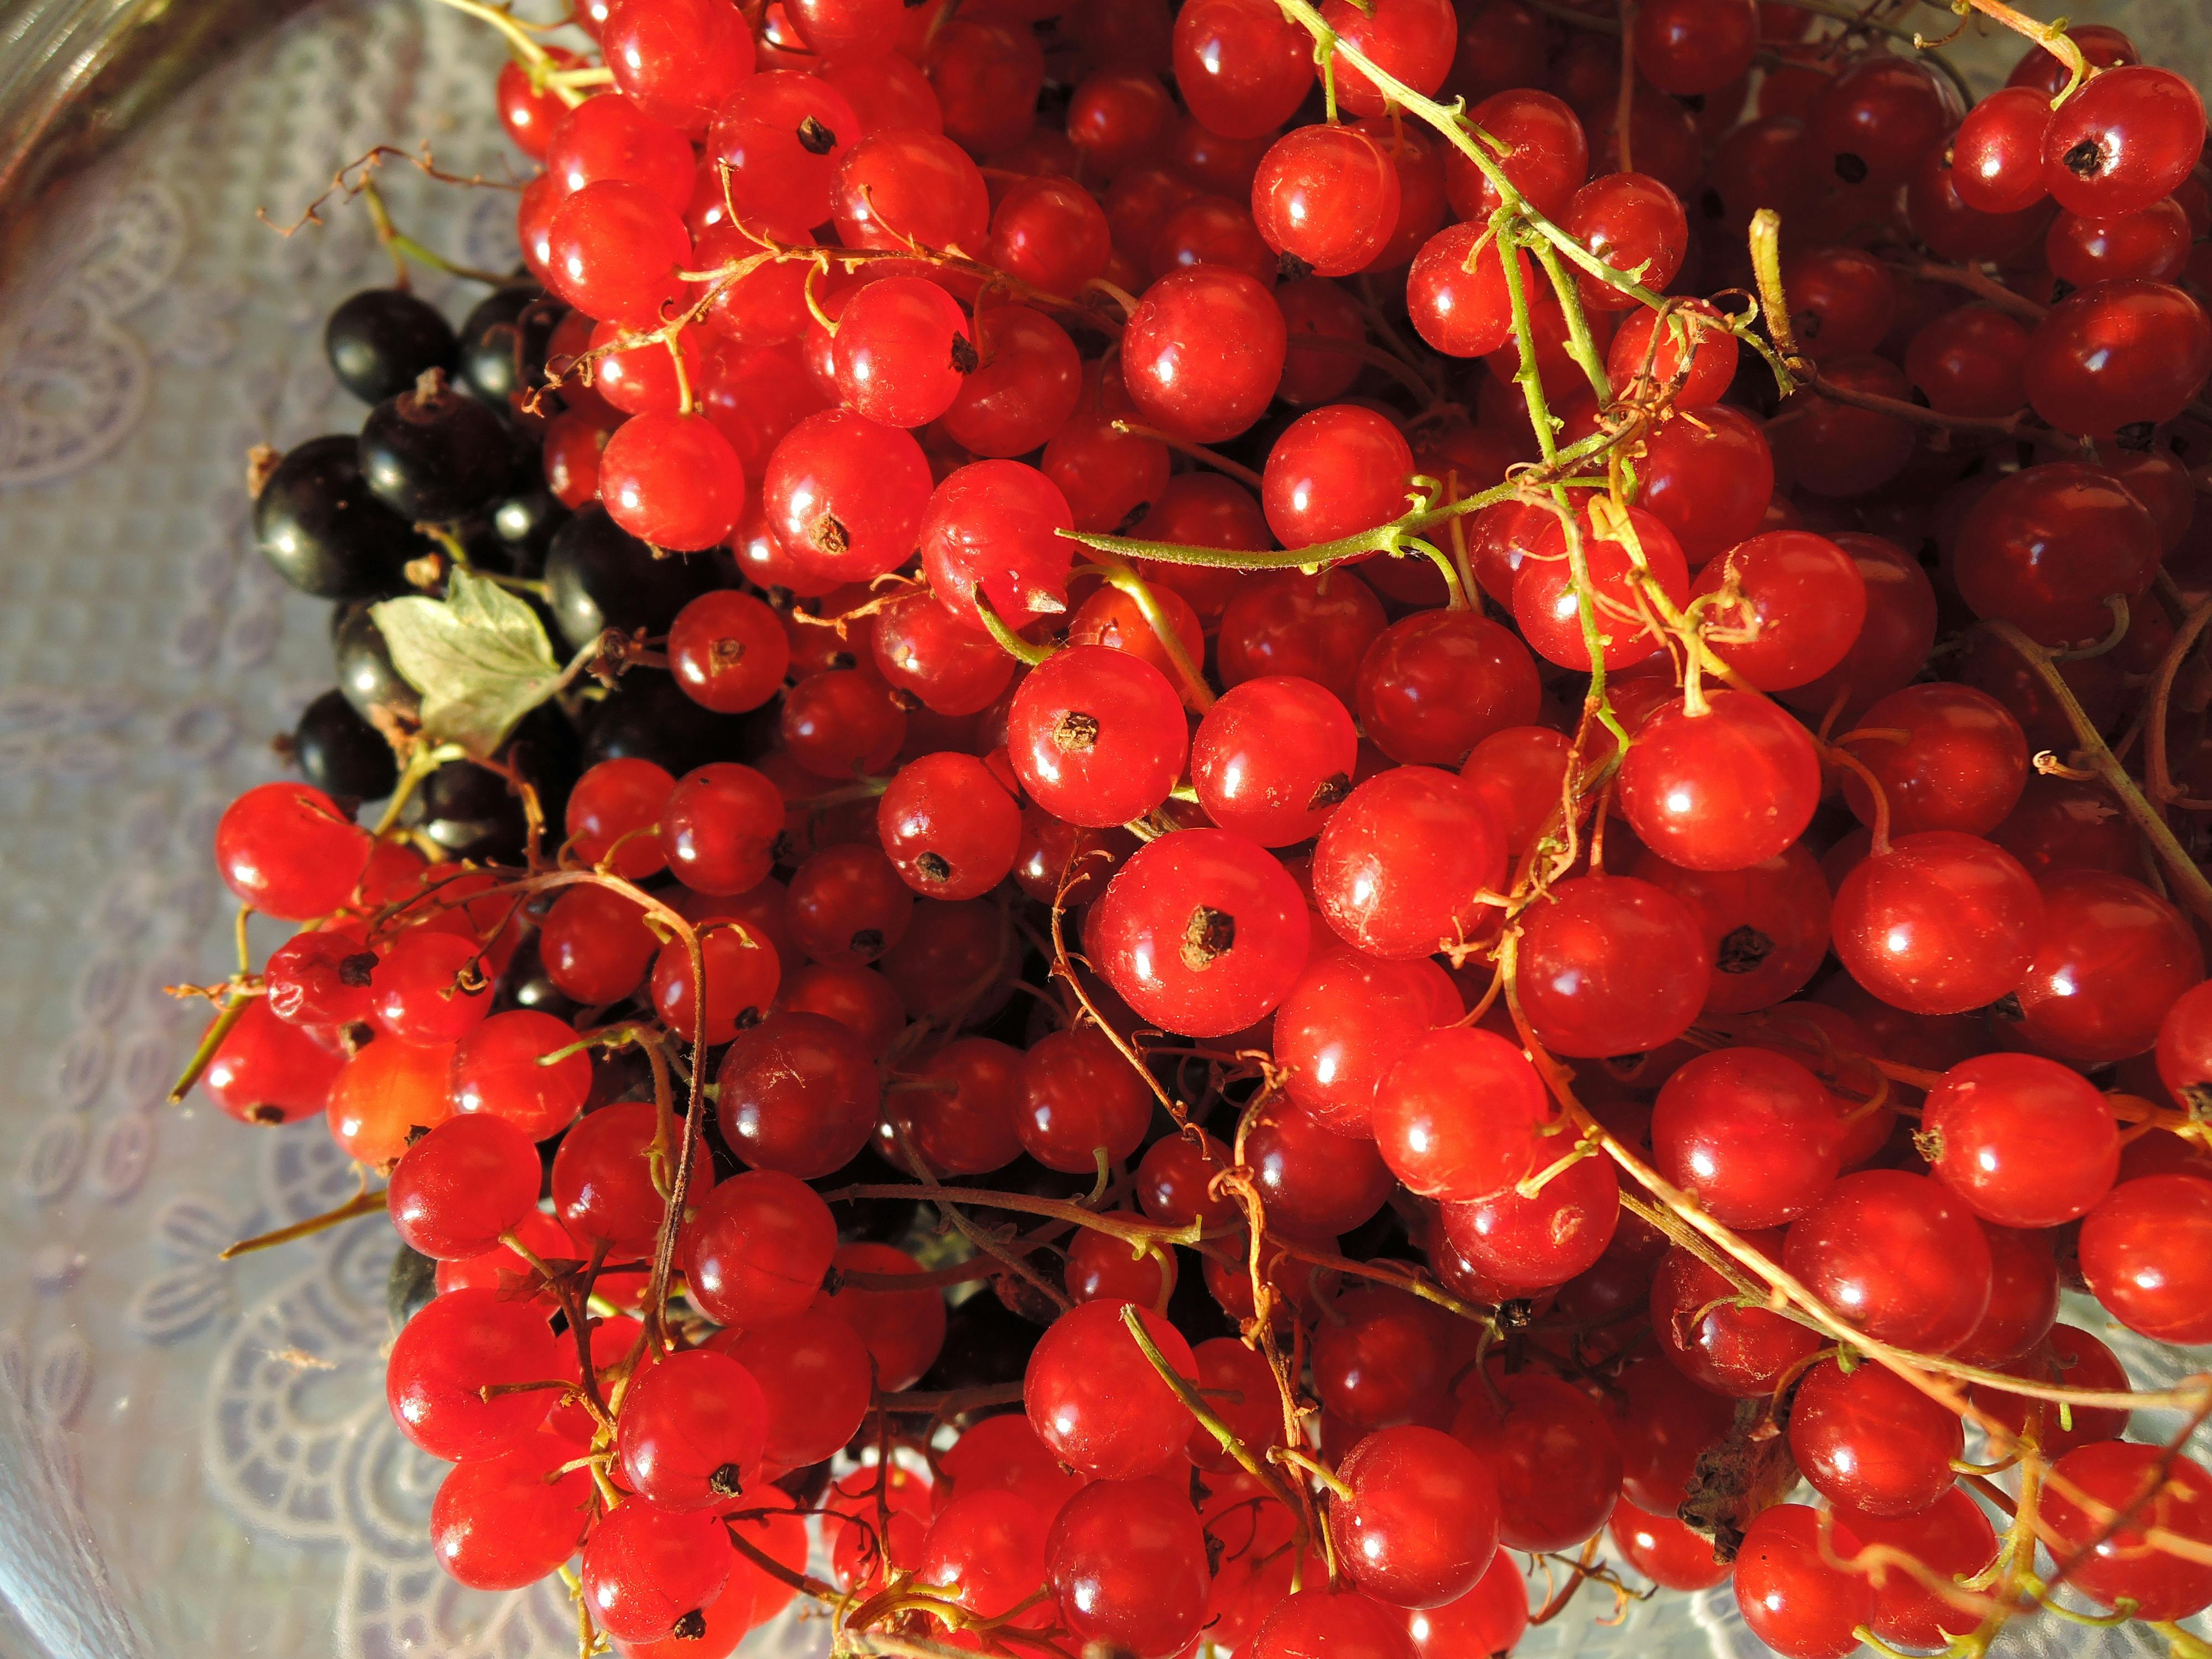 Free stock photo of berries, red berries, red currant